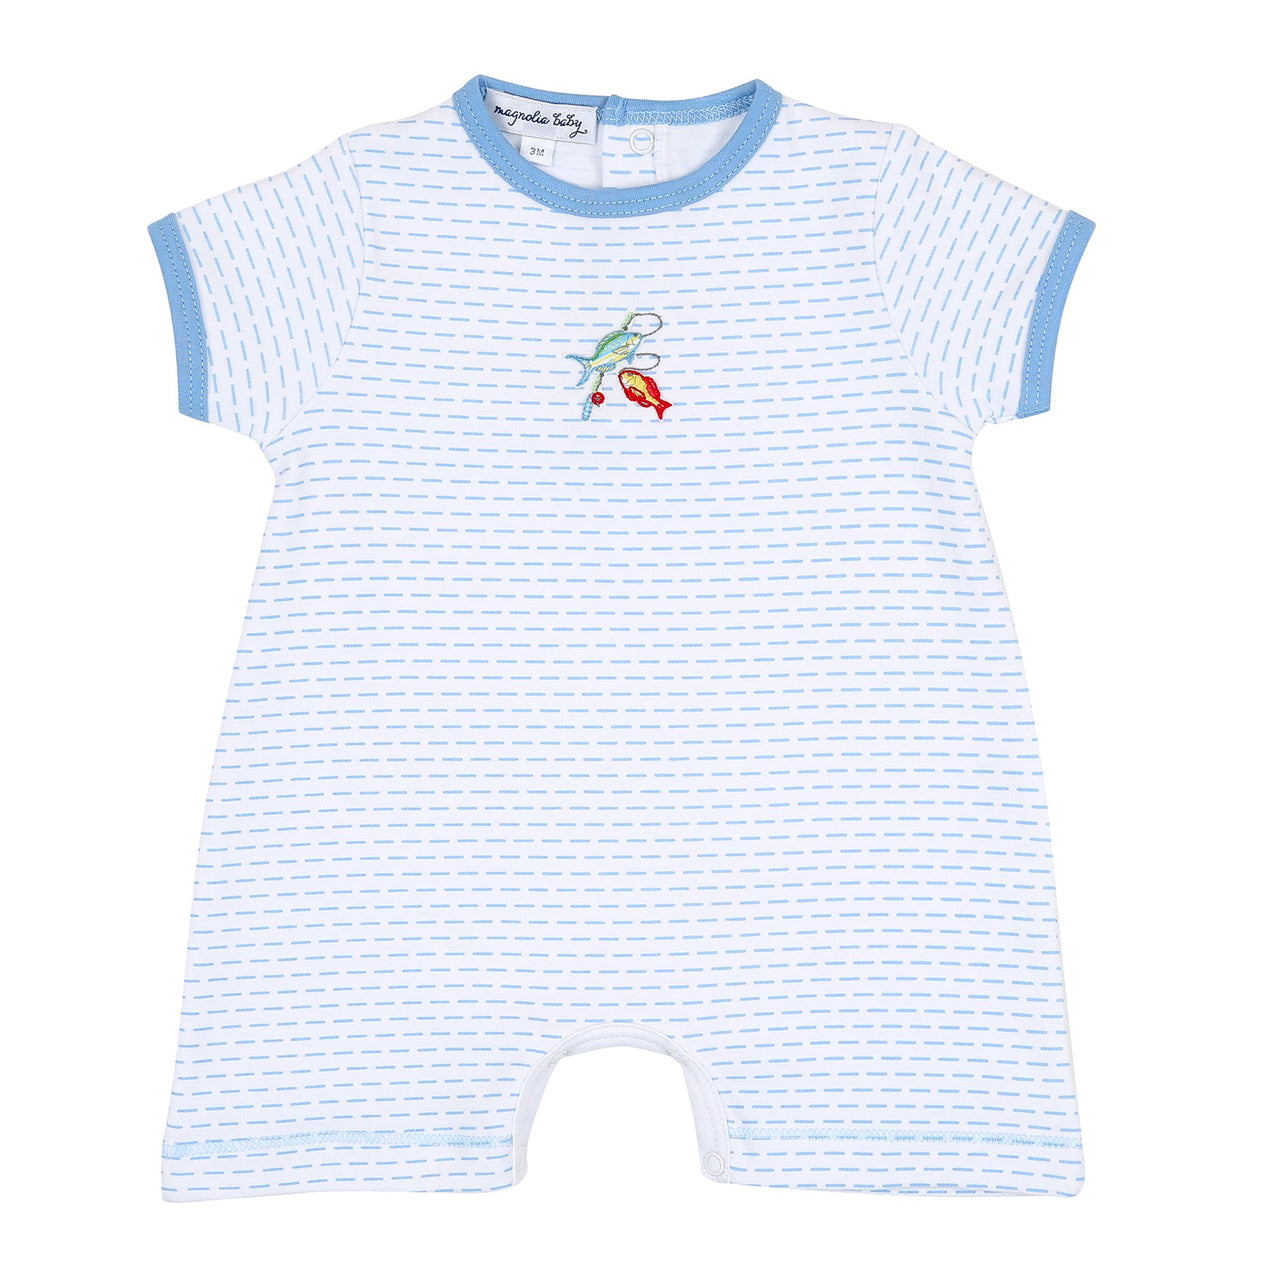 Magnolia Baby Fish All Day Emb Short Playsuit LB 1349-978